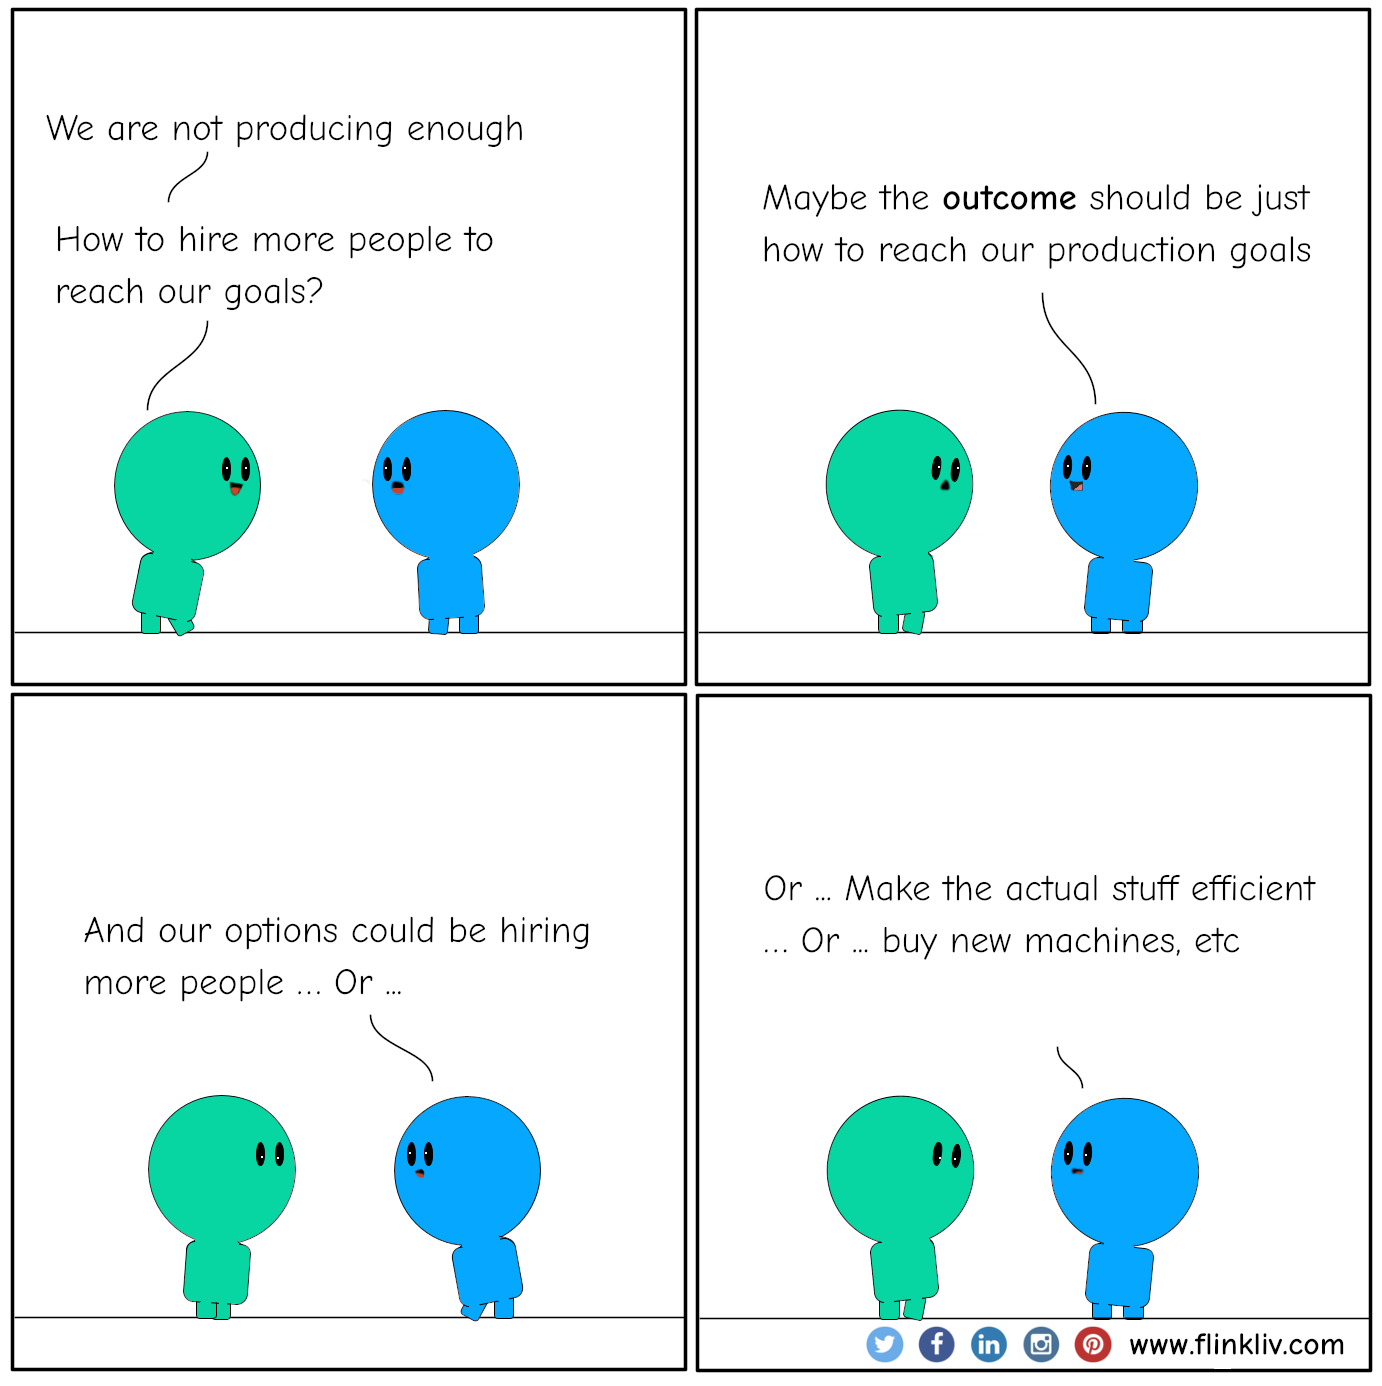 Conversation between A and B about the outcome in decision making.
              A: We are not producing enough
A: How to hire more people to reach our goals?
B: Maybe the outcome should be just how to reach our production goals 
B: And our options could be hiring people, make the actual stuff efficient, buy new machines, etc
              